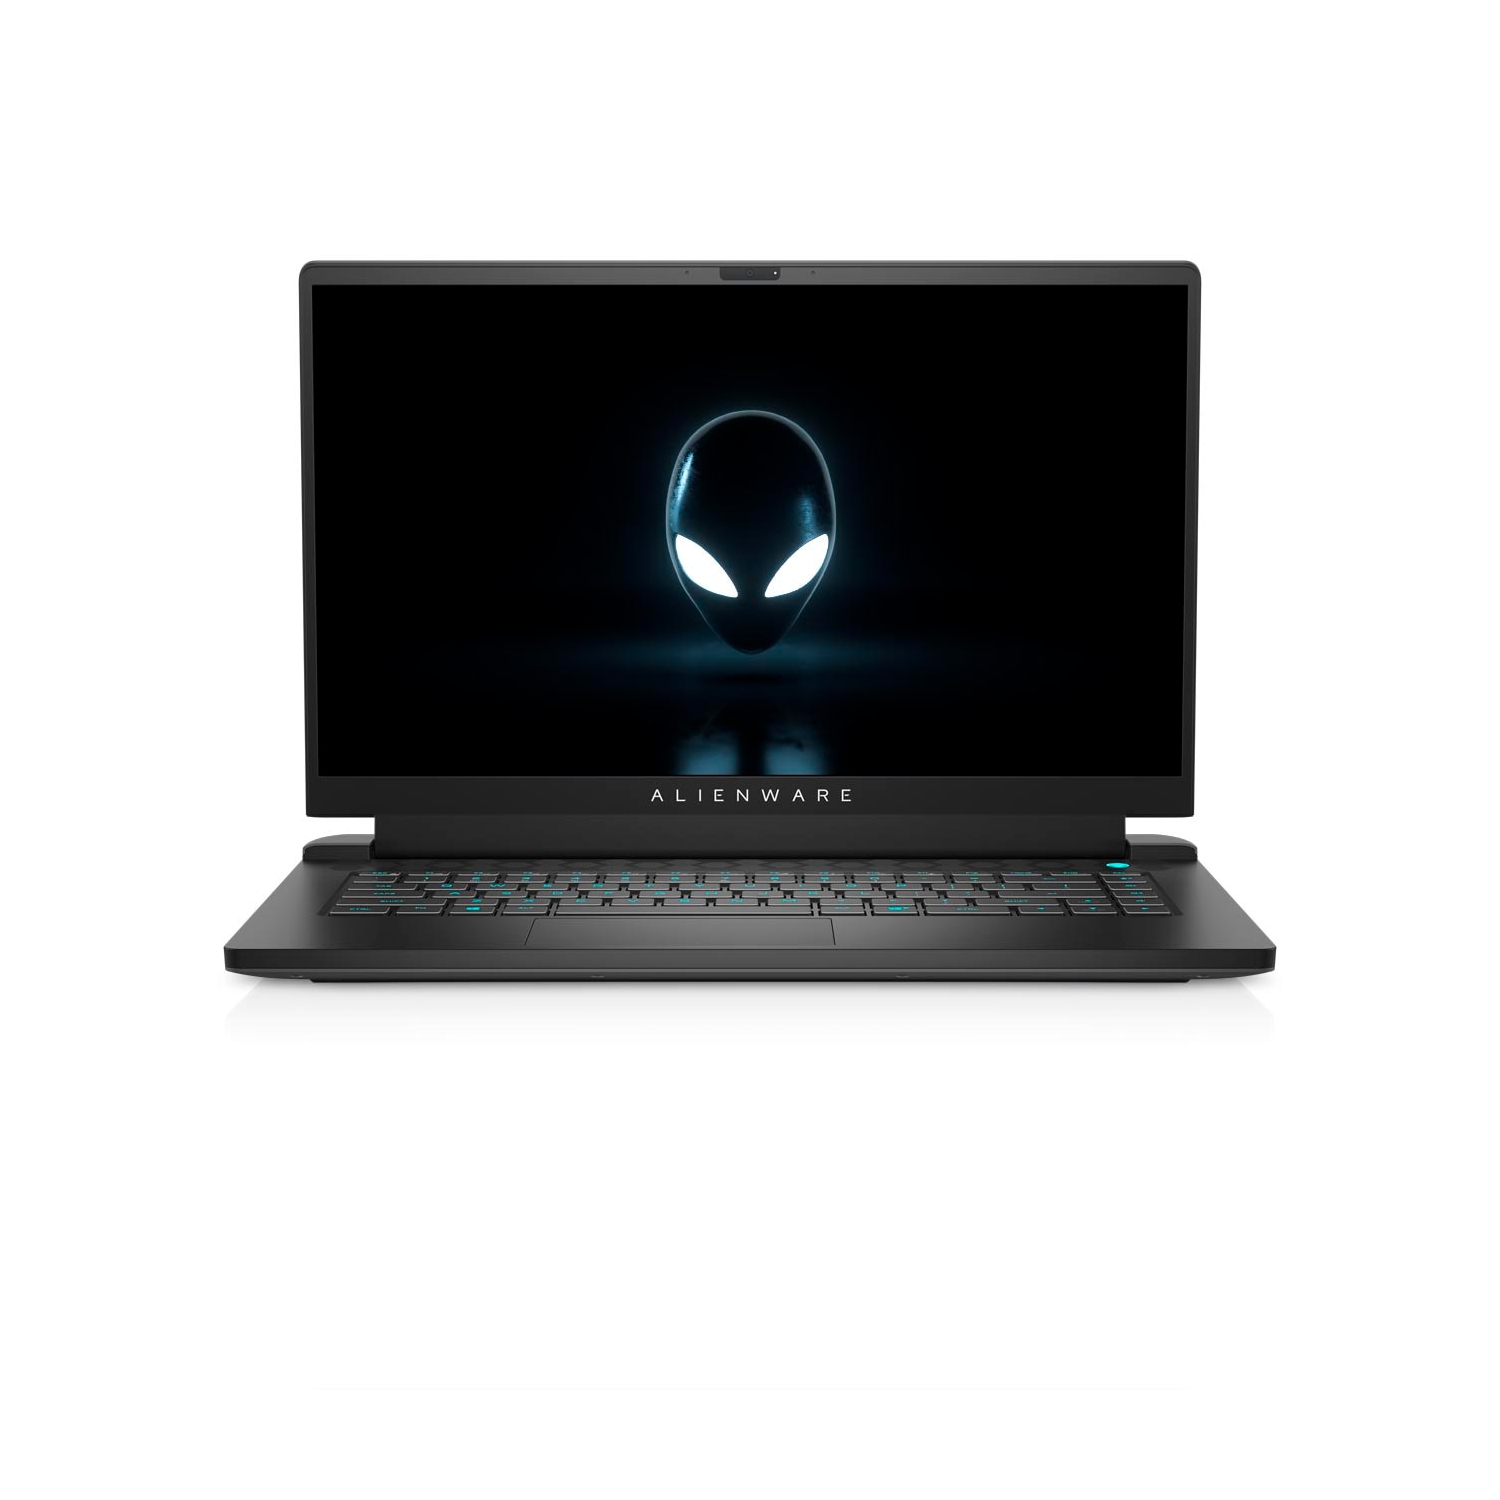 Refurbished (Excellent) - Dell Alienware m15 R5 Ryzen Edition Gaming Laptop (2021), 15.6" QHD, Core Ryzen 9, 1TB SSD, 32GB RAM, RTX 3070, 12 Cores @ 4.7 GHz Certified